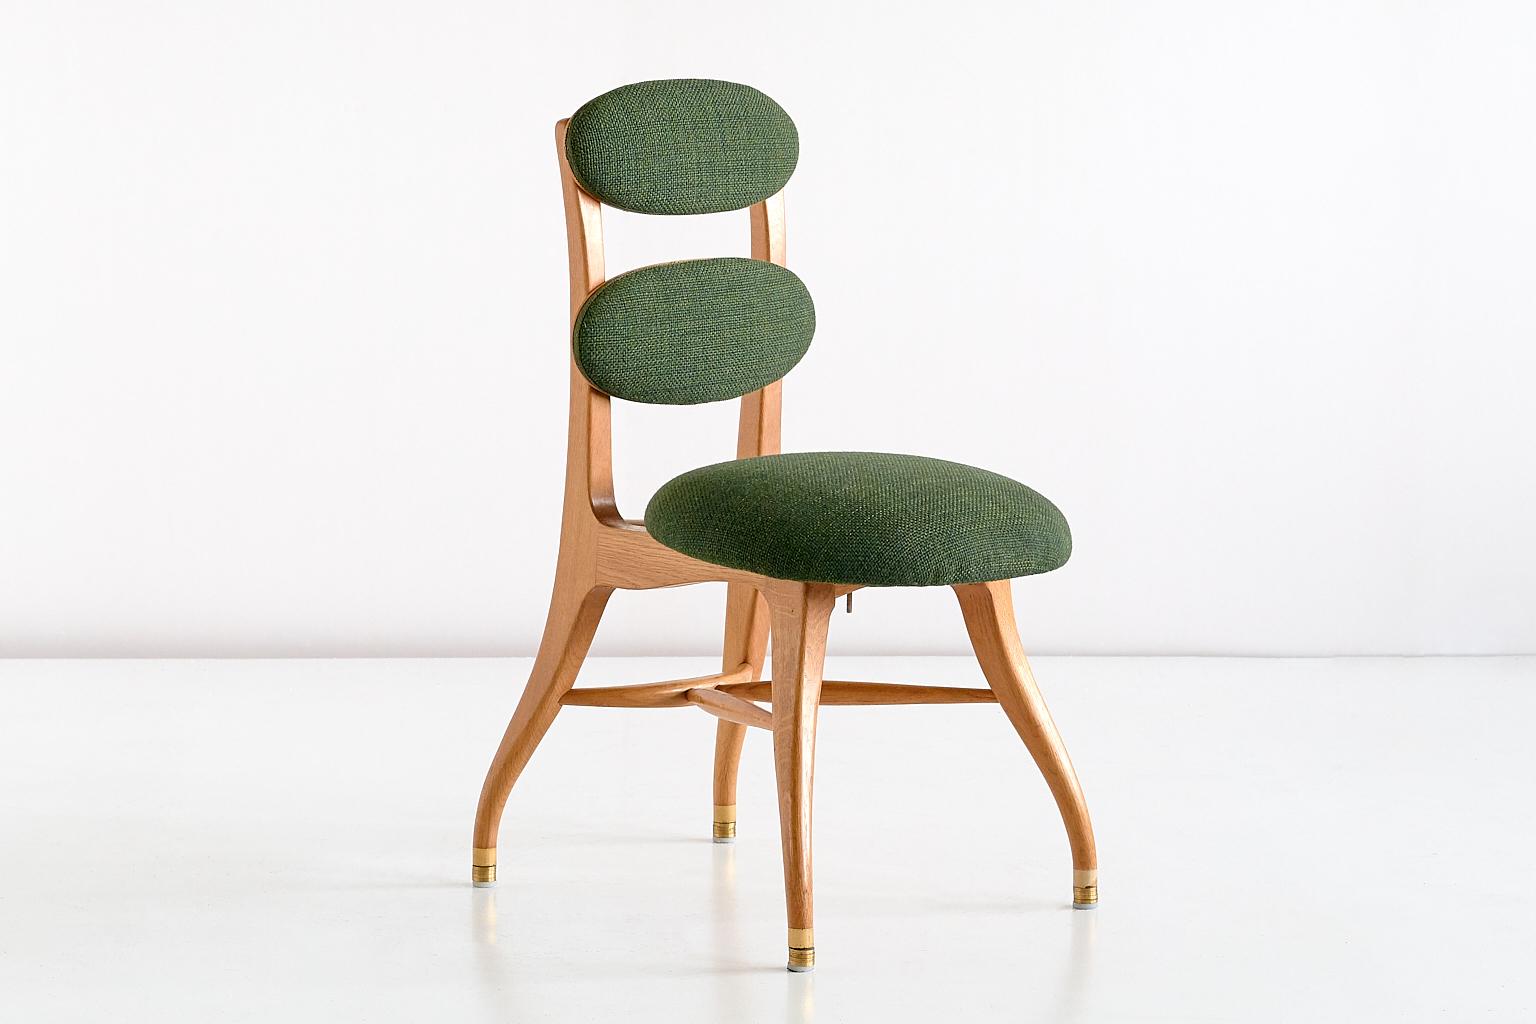 This rare chair was designed by Vilhelm Lauritzen for the iconic Radiohuset building in Copenhagen in the 1950s. The chair was specifically designed for the orchestra musicians to be seated comfortably in the building's concert hall. An archival